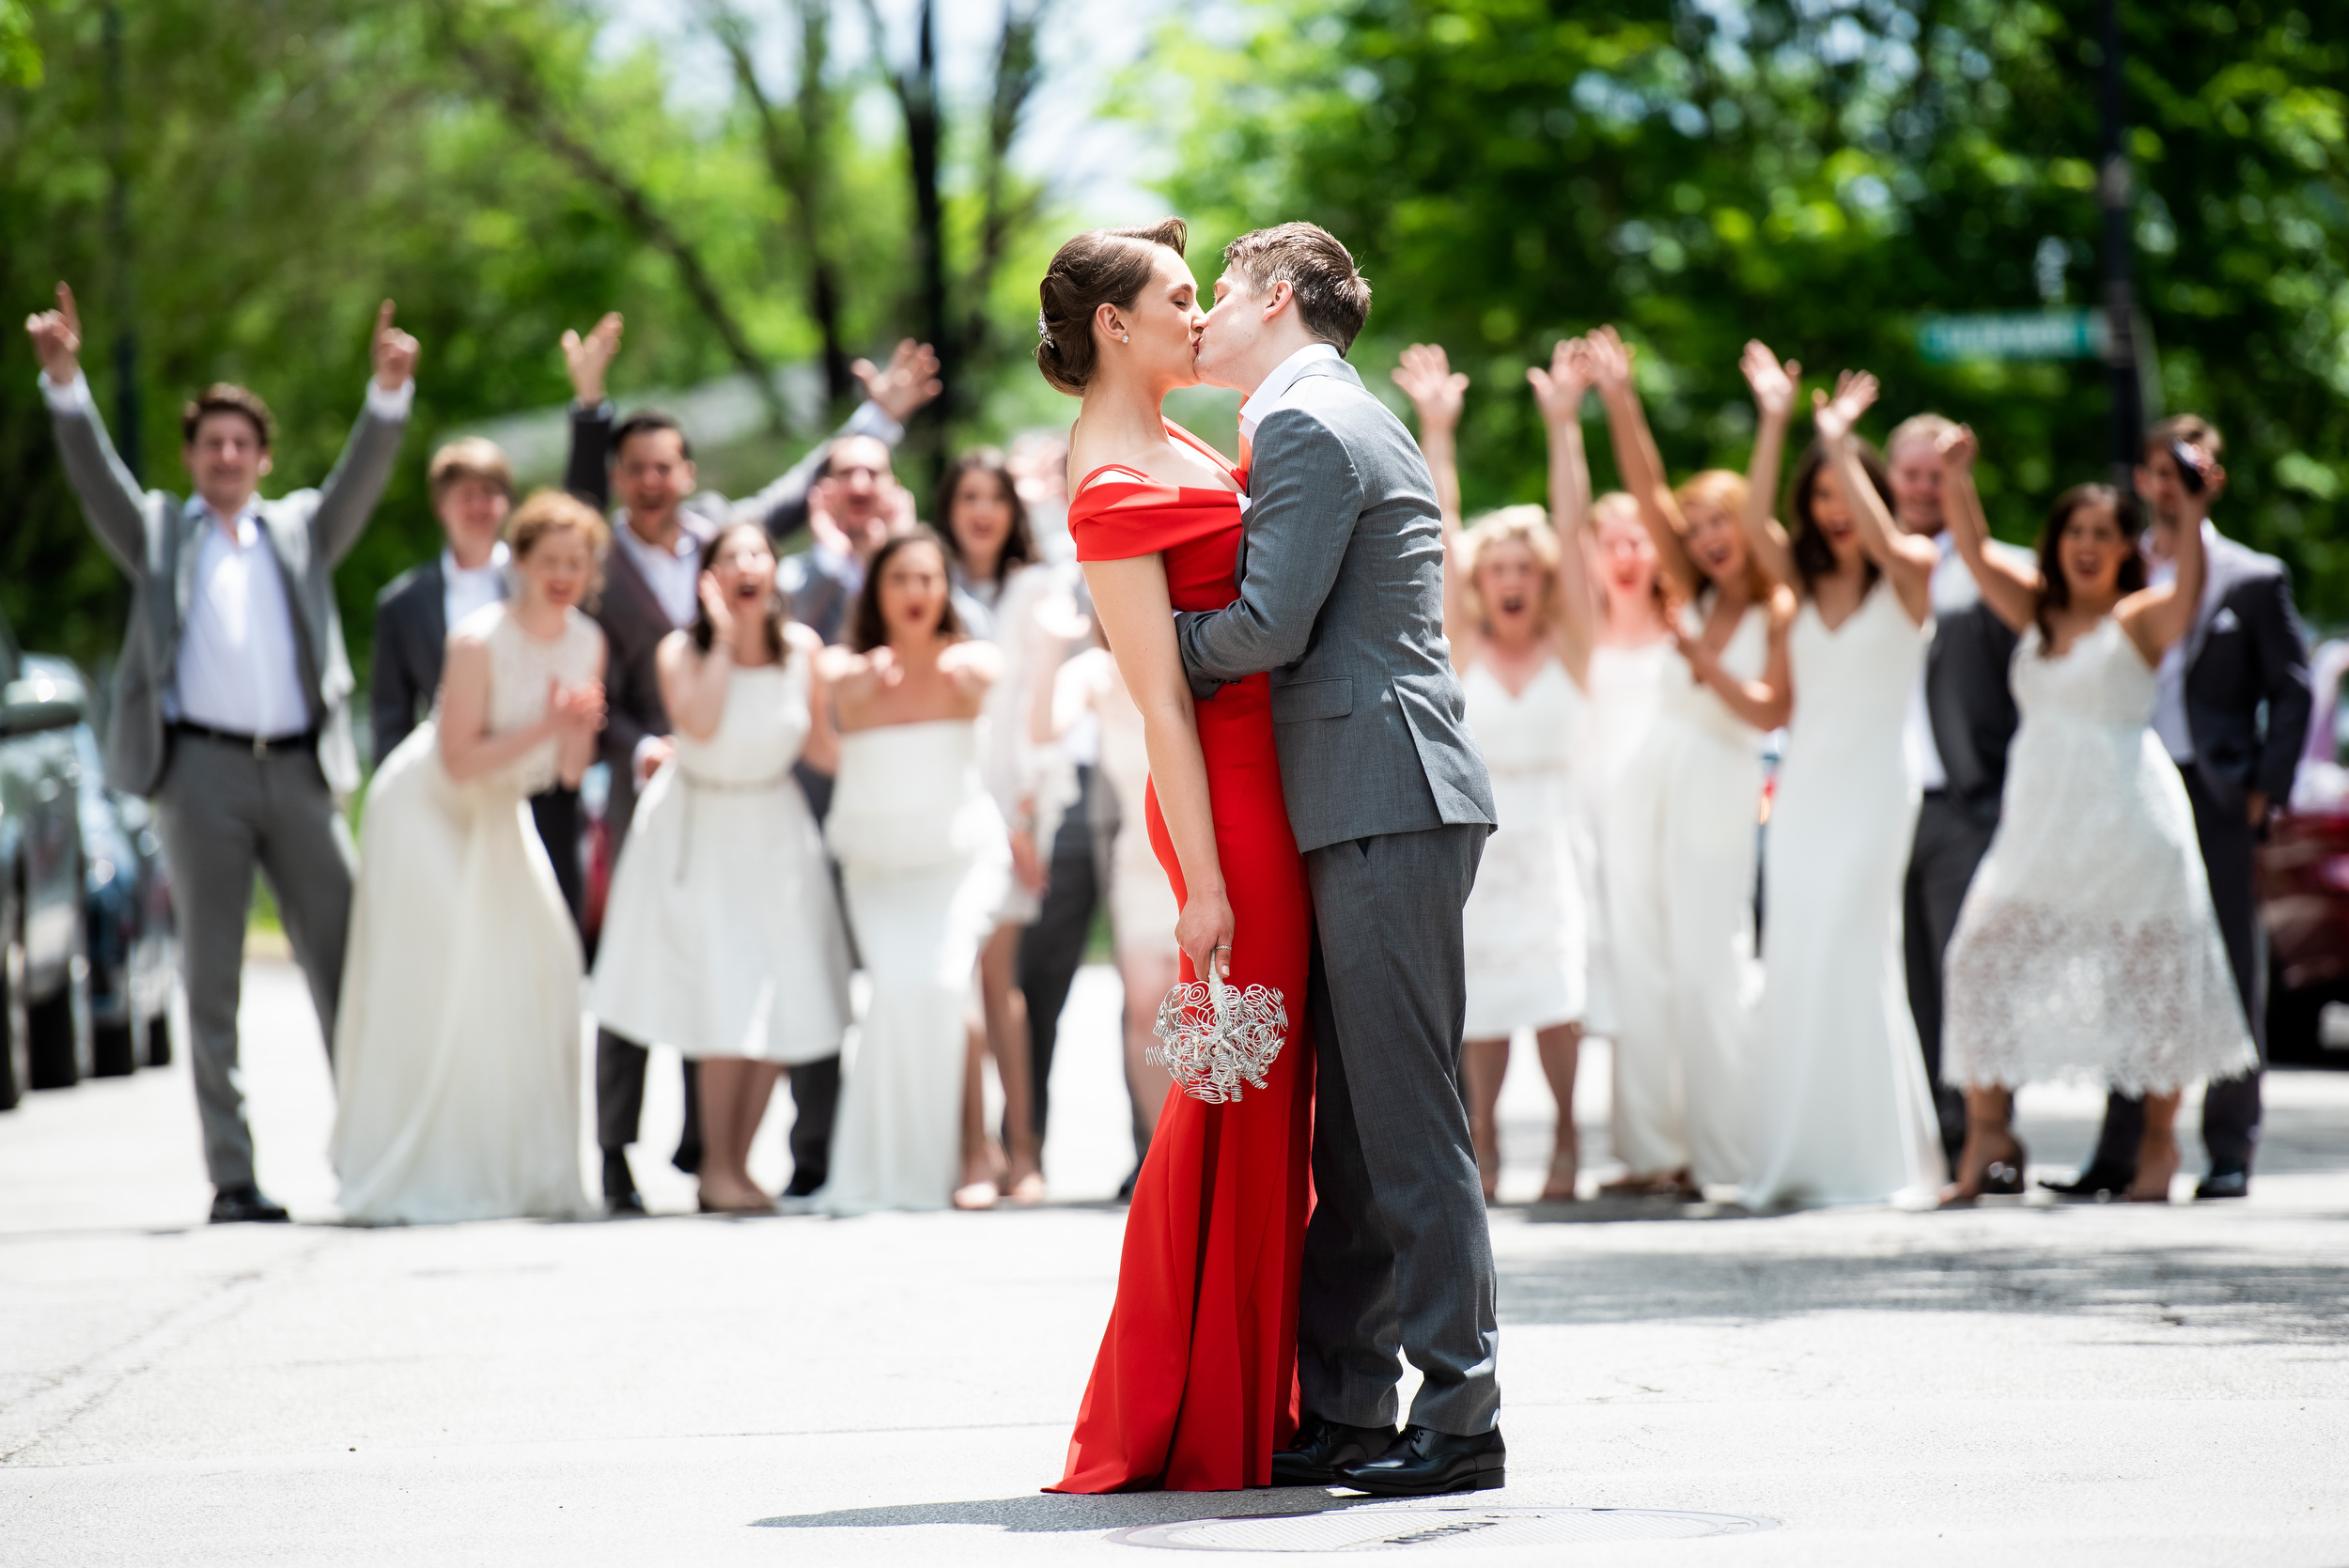 Fun wedding photo ideas for Carnivale Chicago wedding captured by J Brown Photography